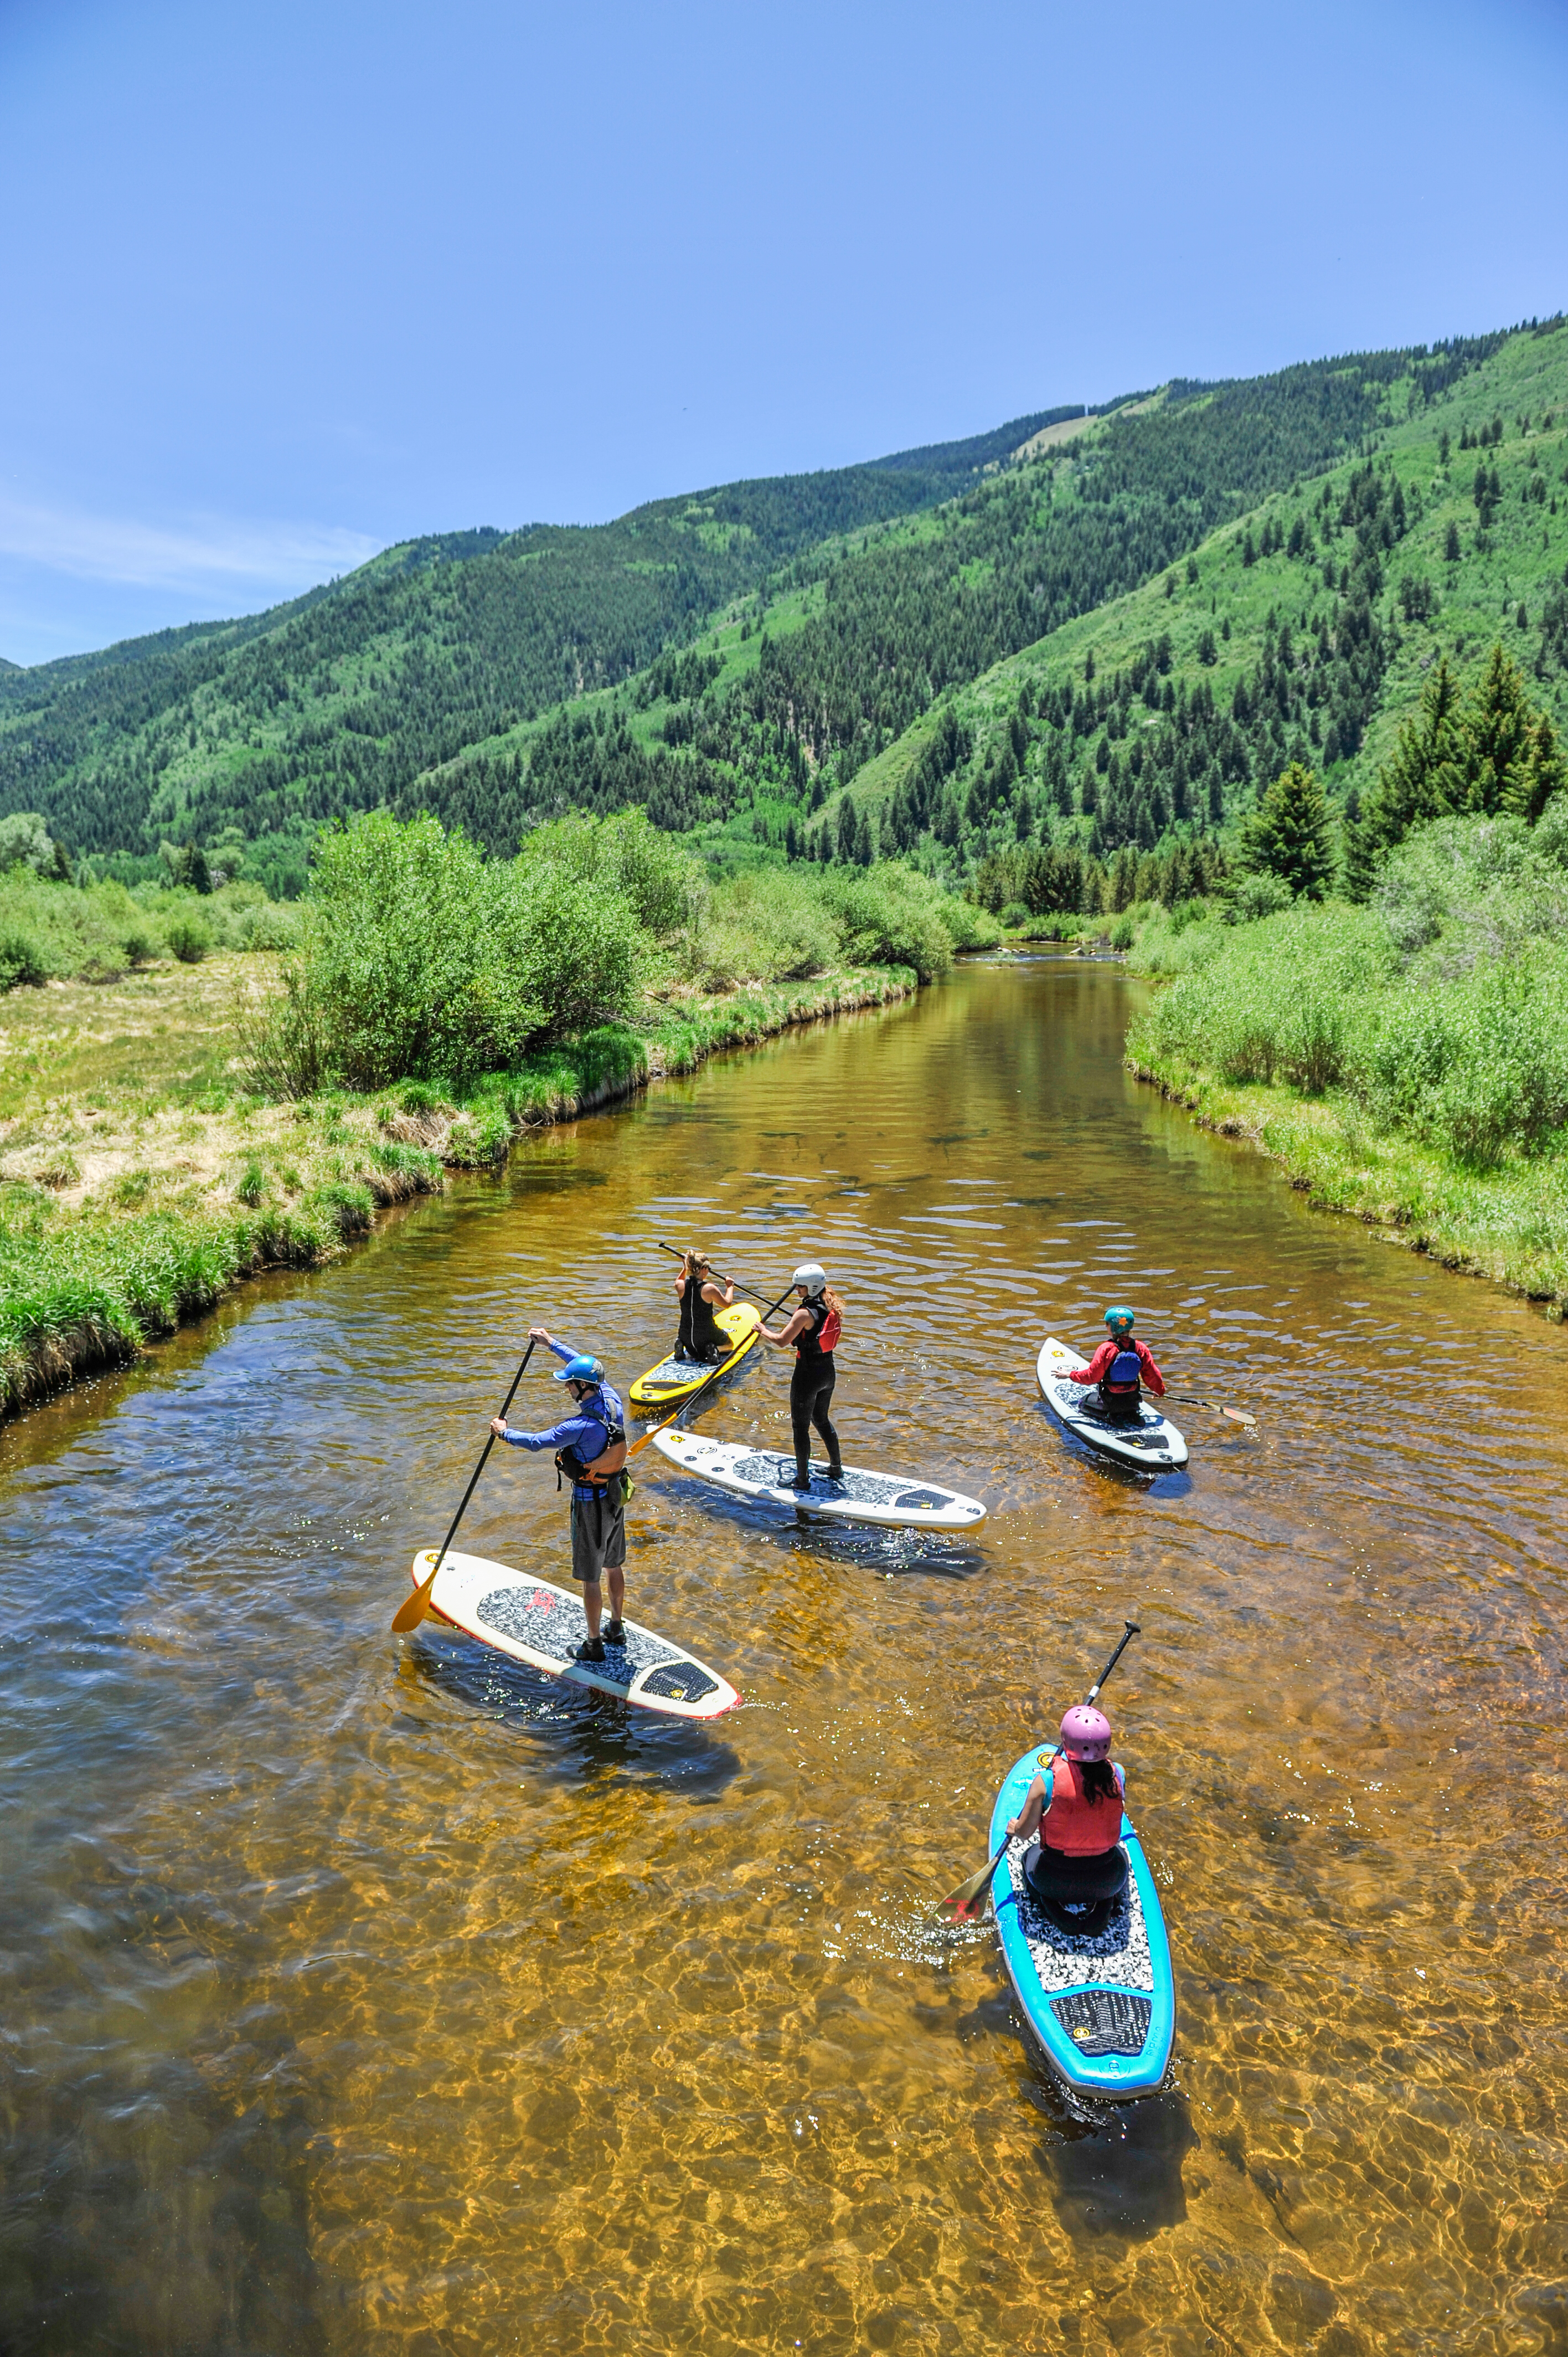 Aspen is not just for skiers